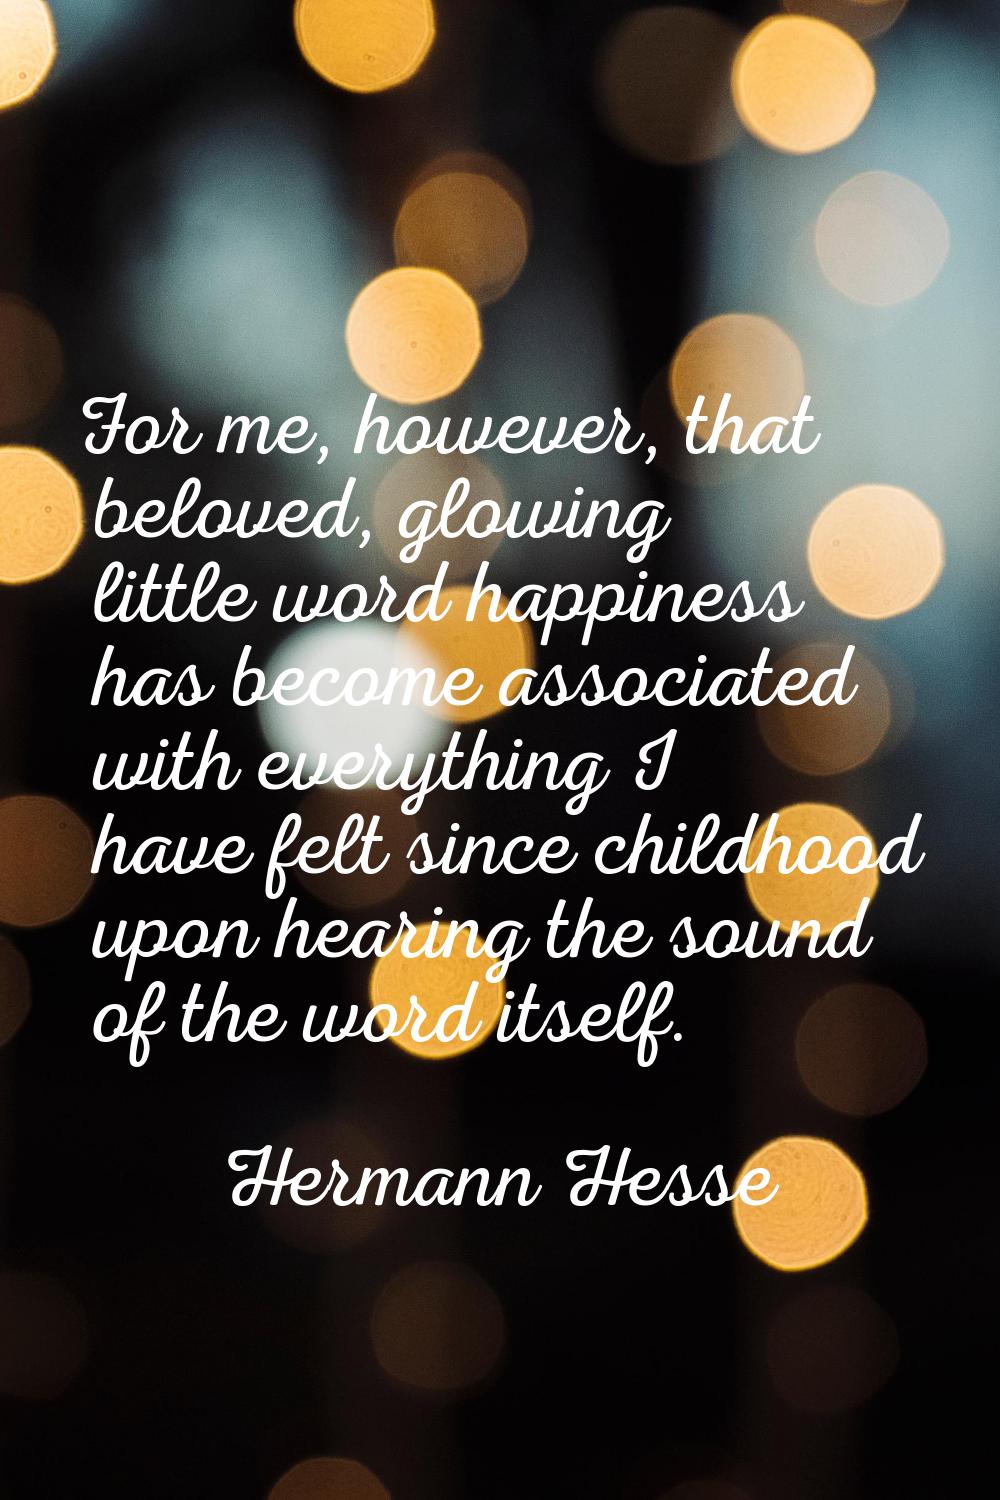 For me, however, that beloved, glowing little word happiness has become associated with everything 